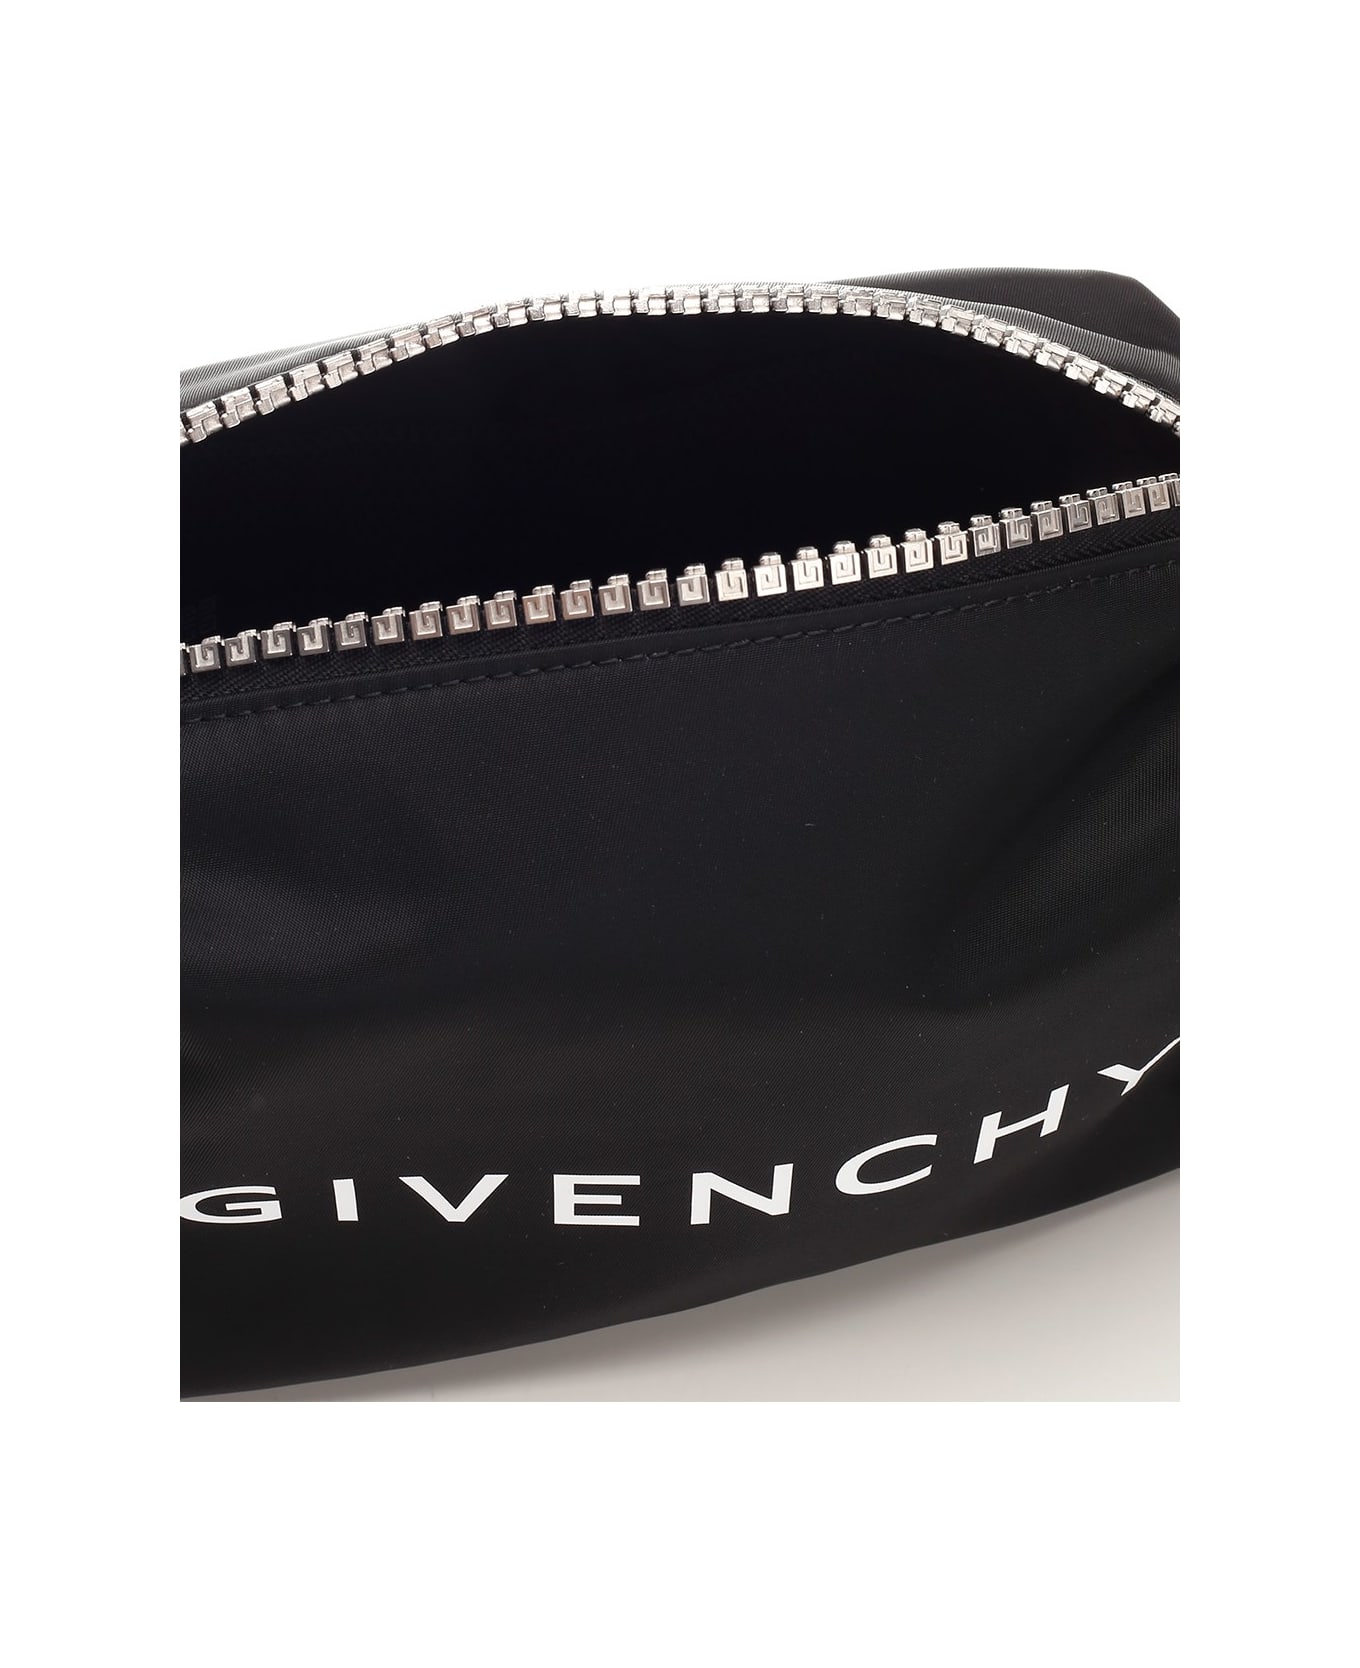 Givenchy Toilet Pouch - Black